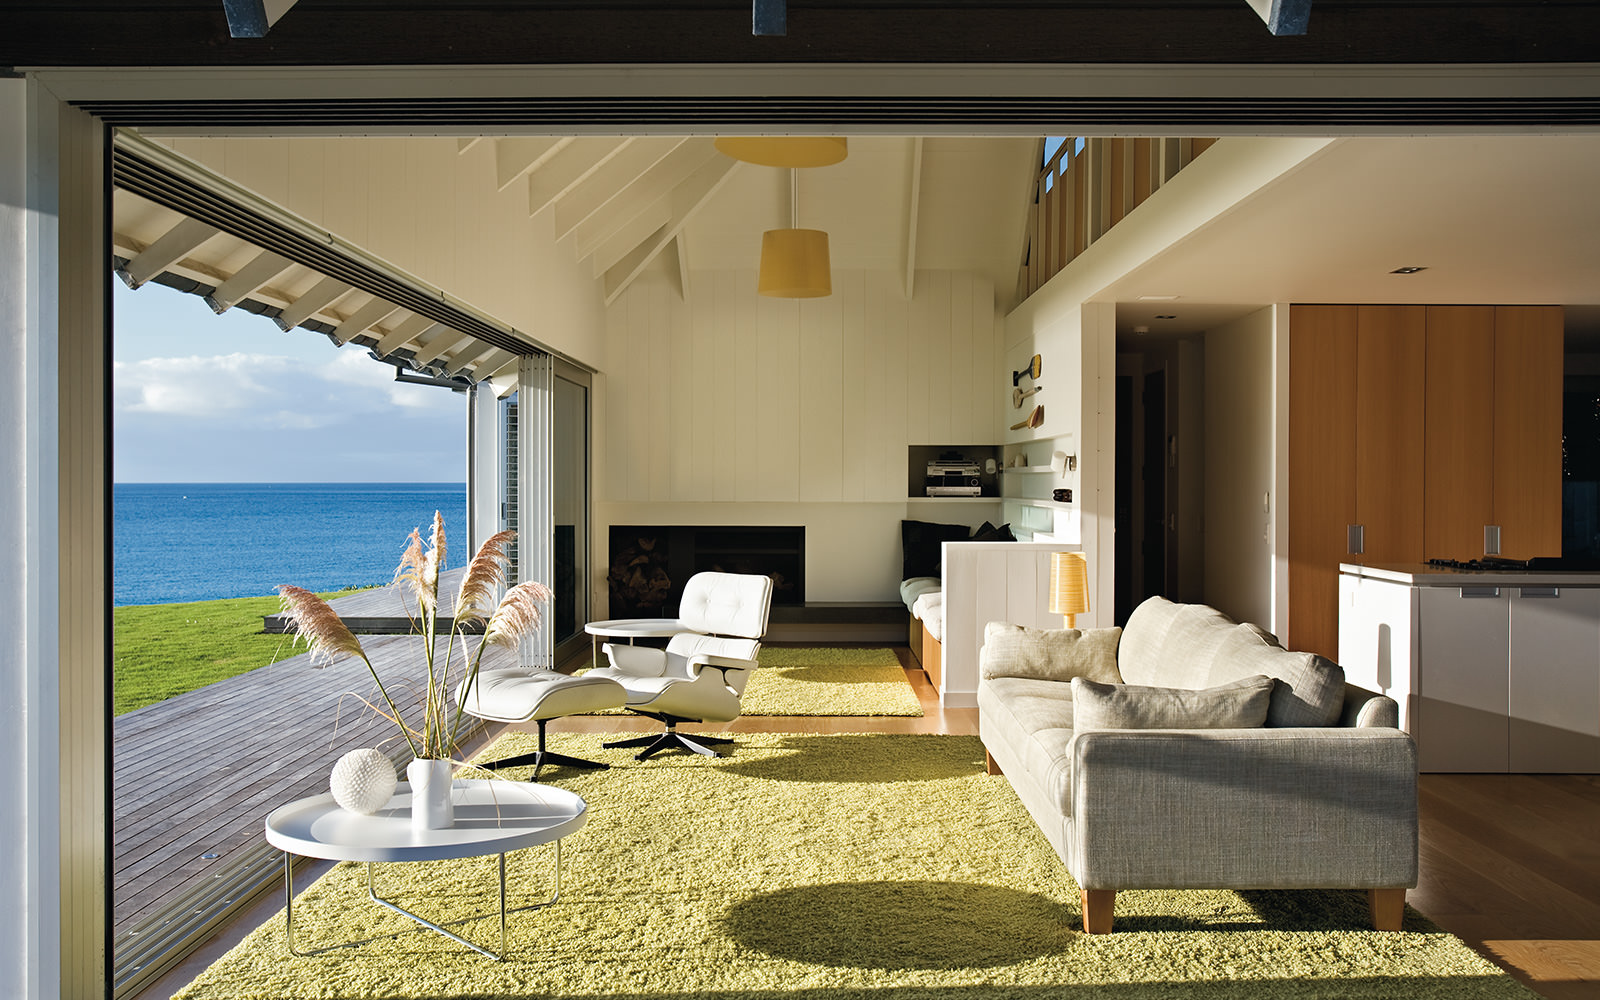 light filled interior green rug by the sea